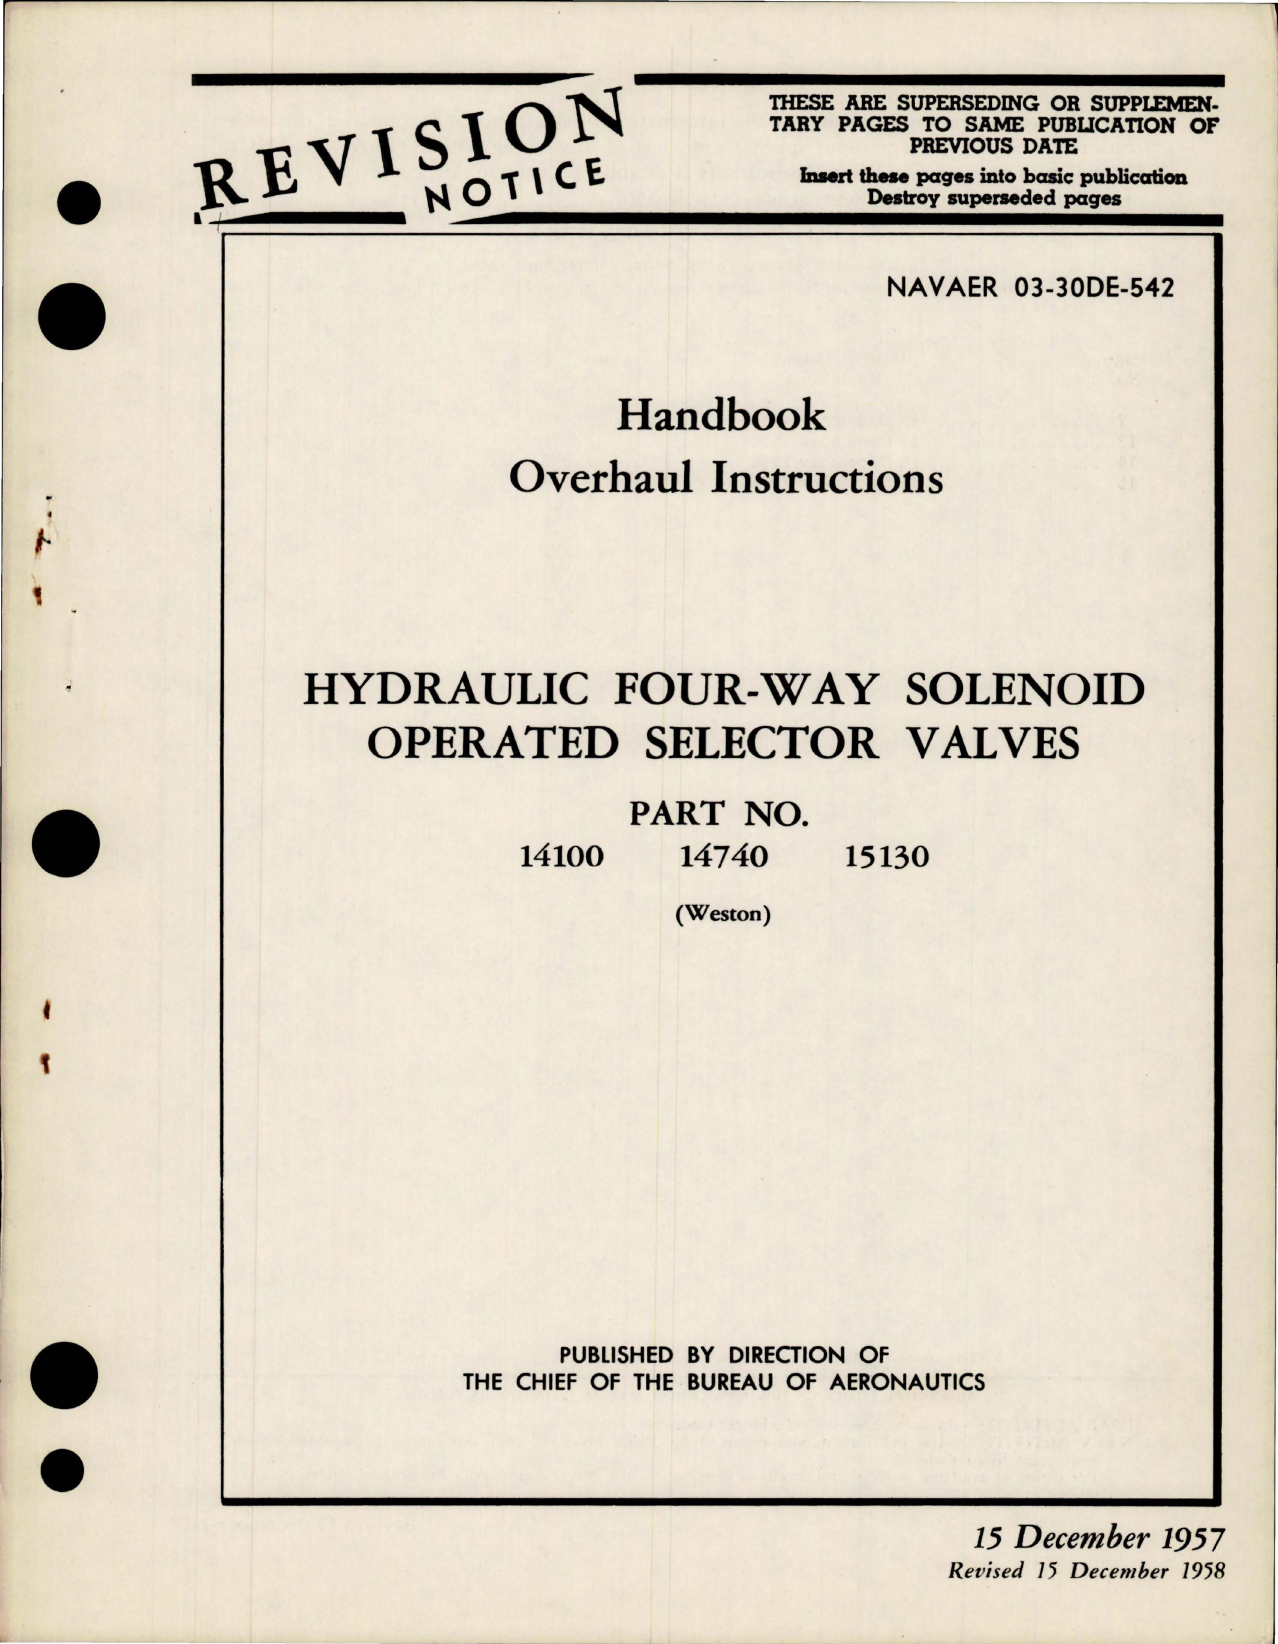 Sample page 1 from AirCorps Library document: Overhaul Instructions for Hydraulic Four Way Solenoid Operated Selector Valves - Parts 14100, 14740 and 15130